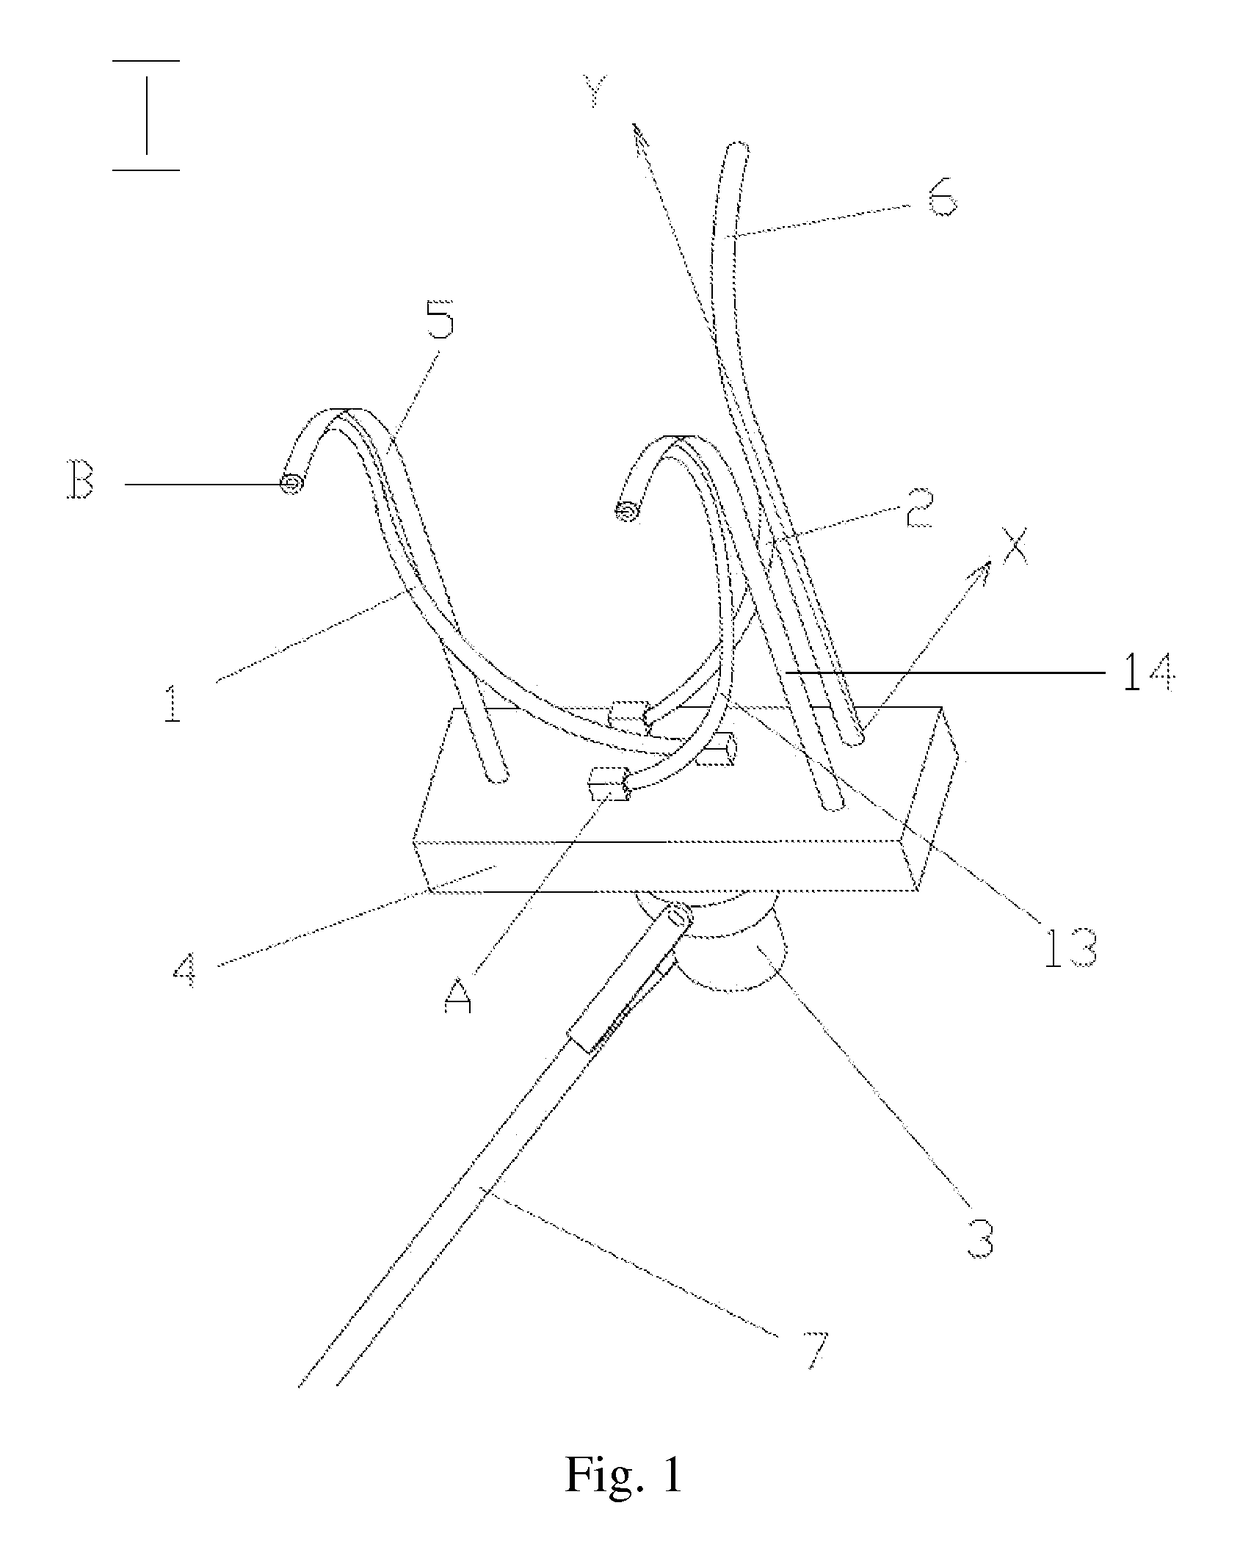 Apparatus for applying a coating to the surface of cylindrical articles